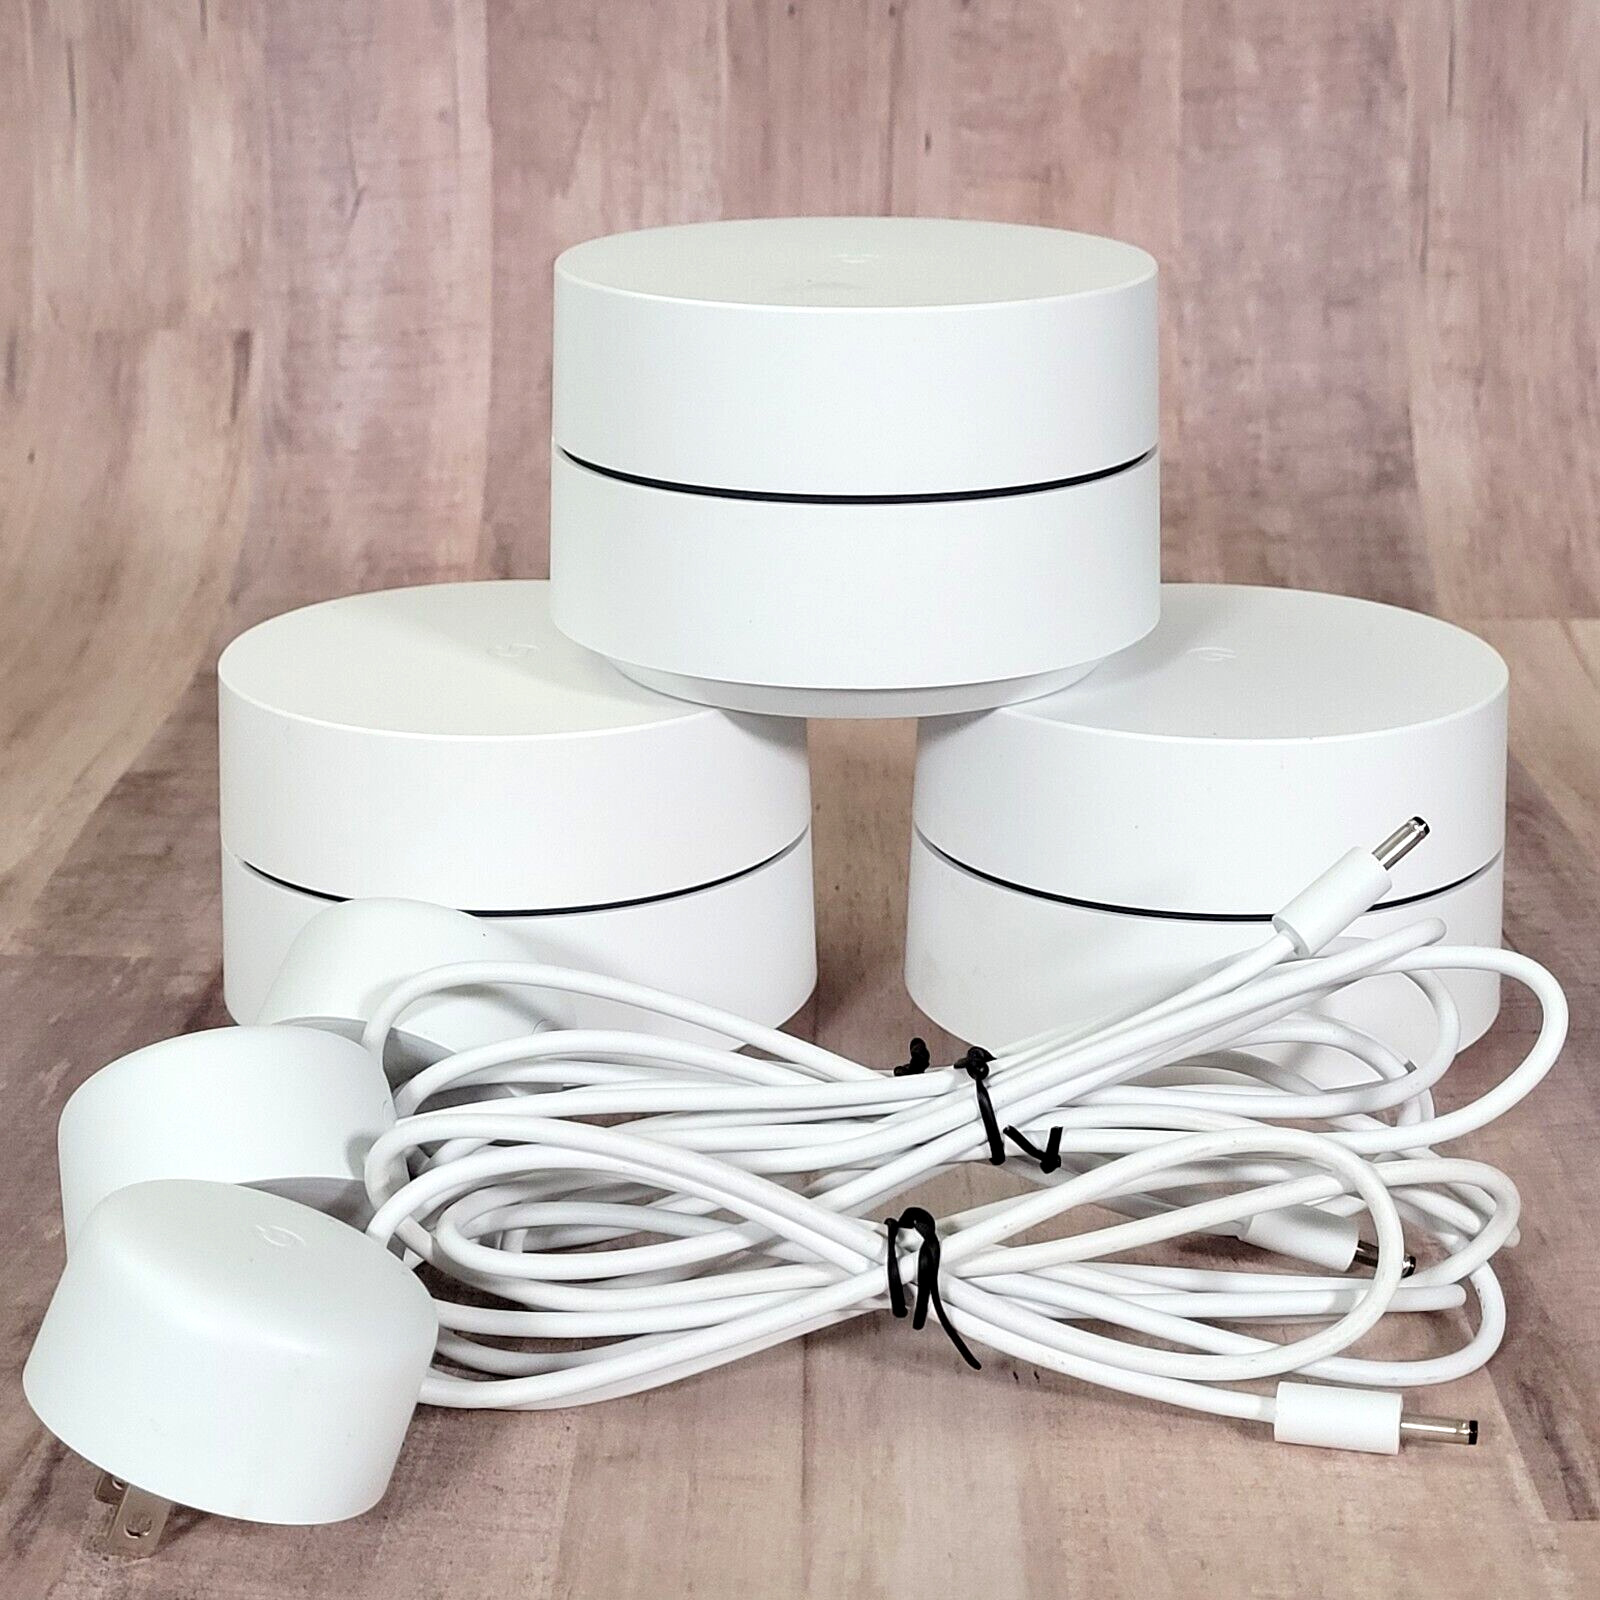 GOOGLE WIFI ACCESS POINT ROUTER GJ2CQ GOOGLE MESH 3 PACK W/ POWER CORDS